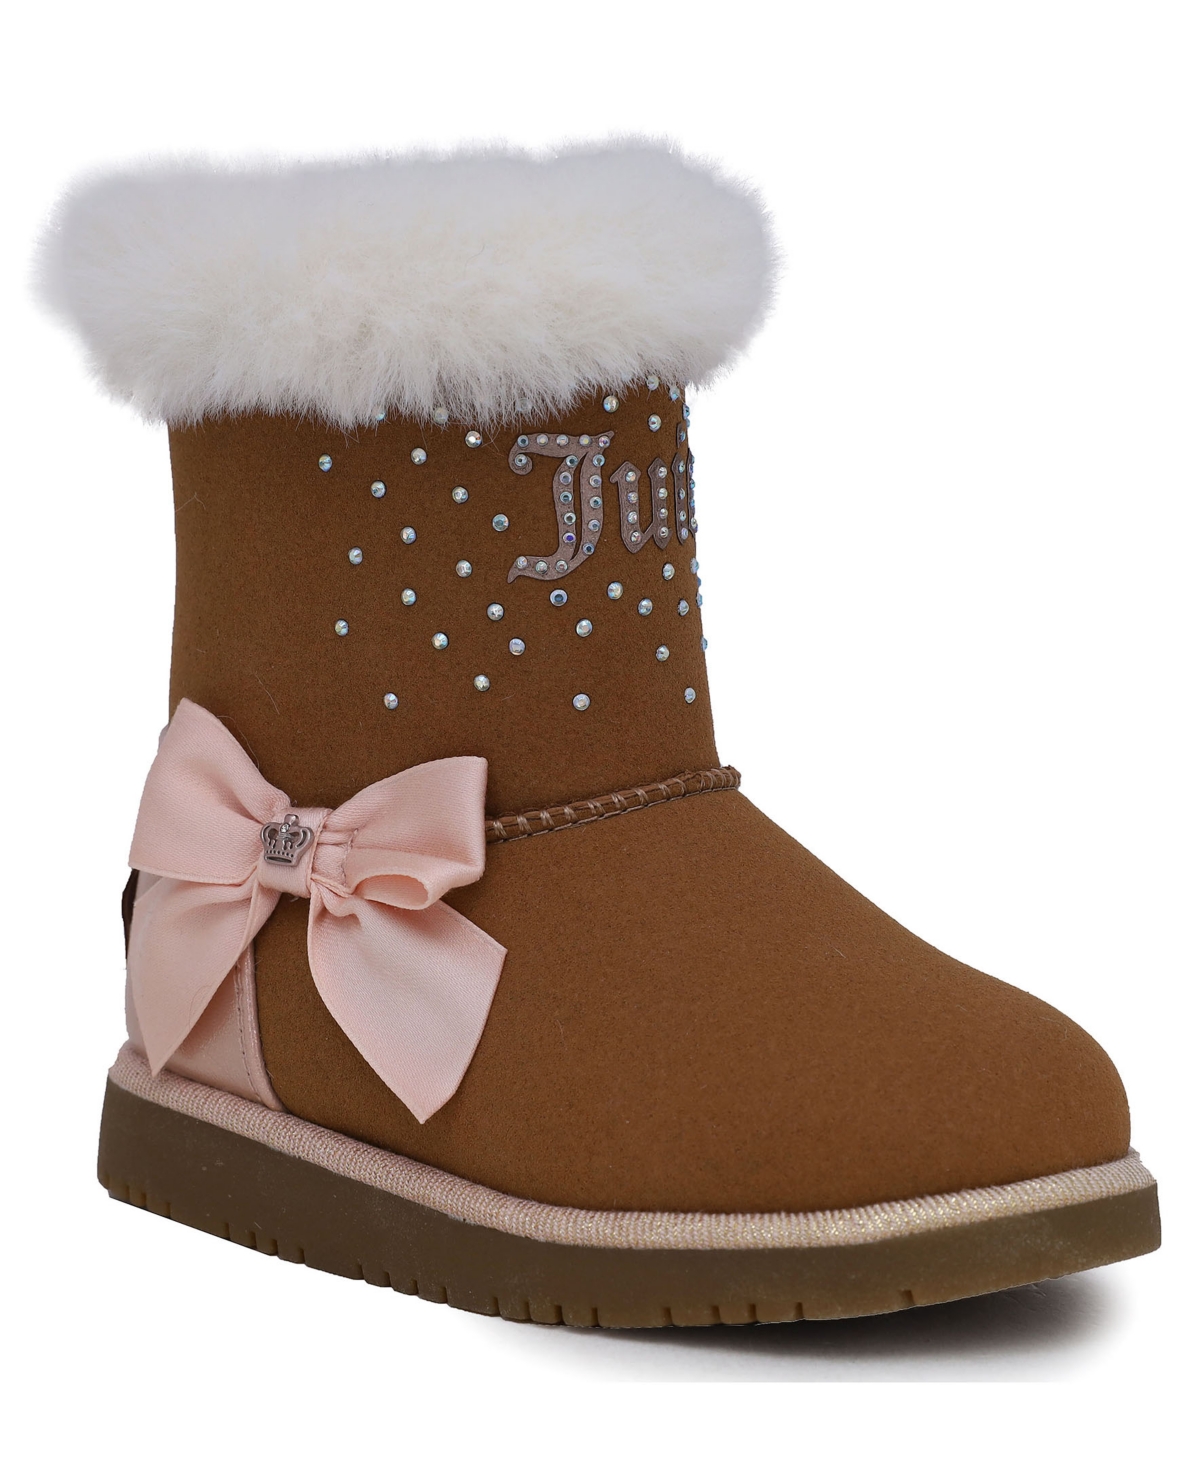 Juicy Couture Big Girls Lil Coronado 2 Cold Weather Boots In Chestnut